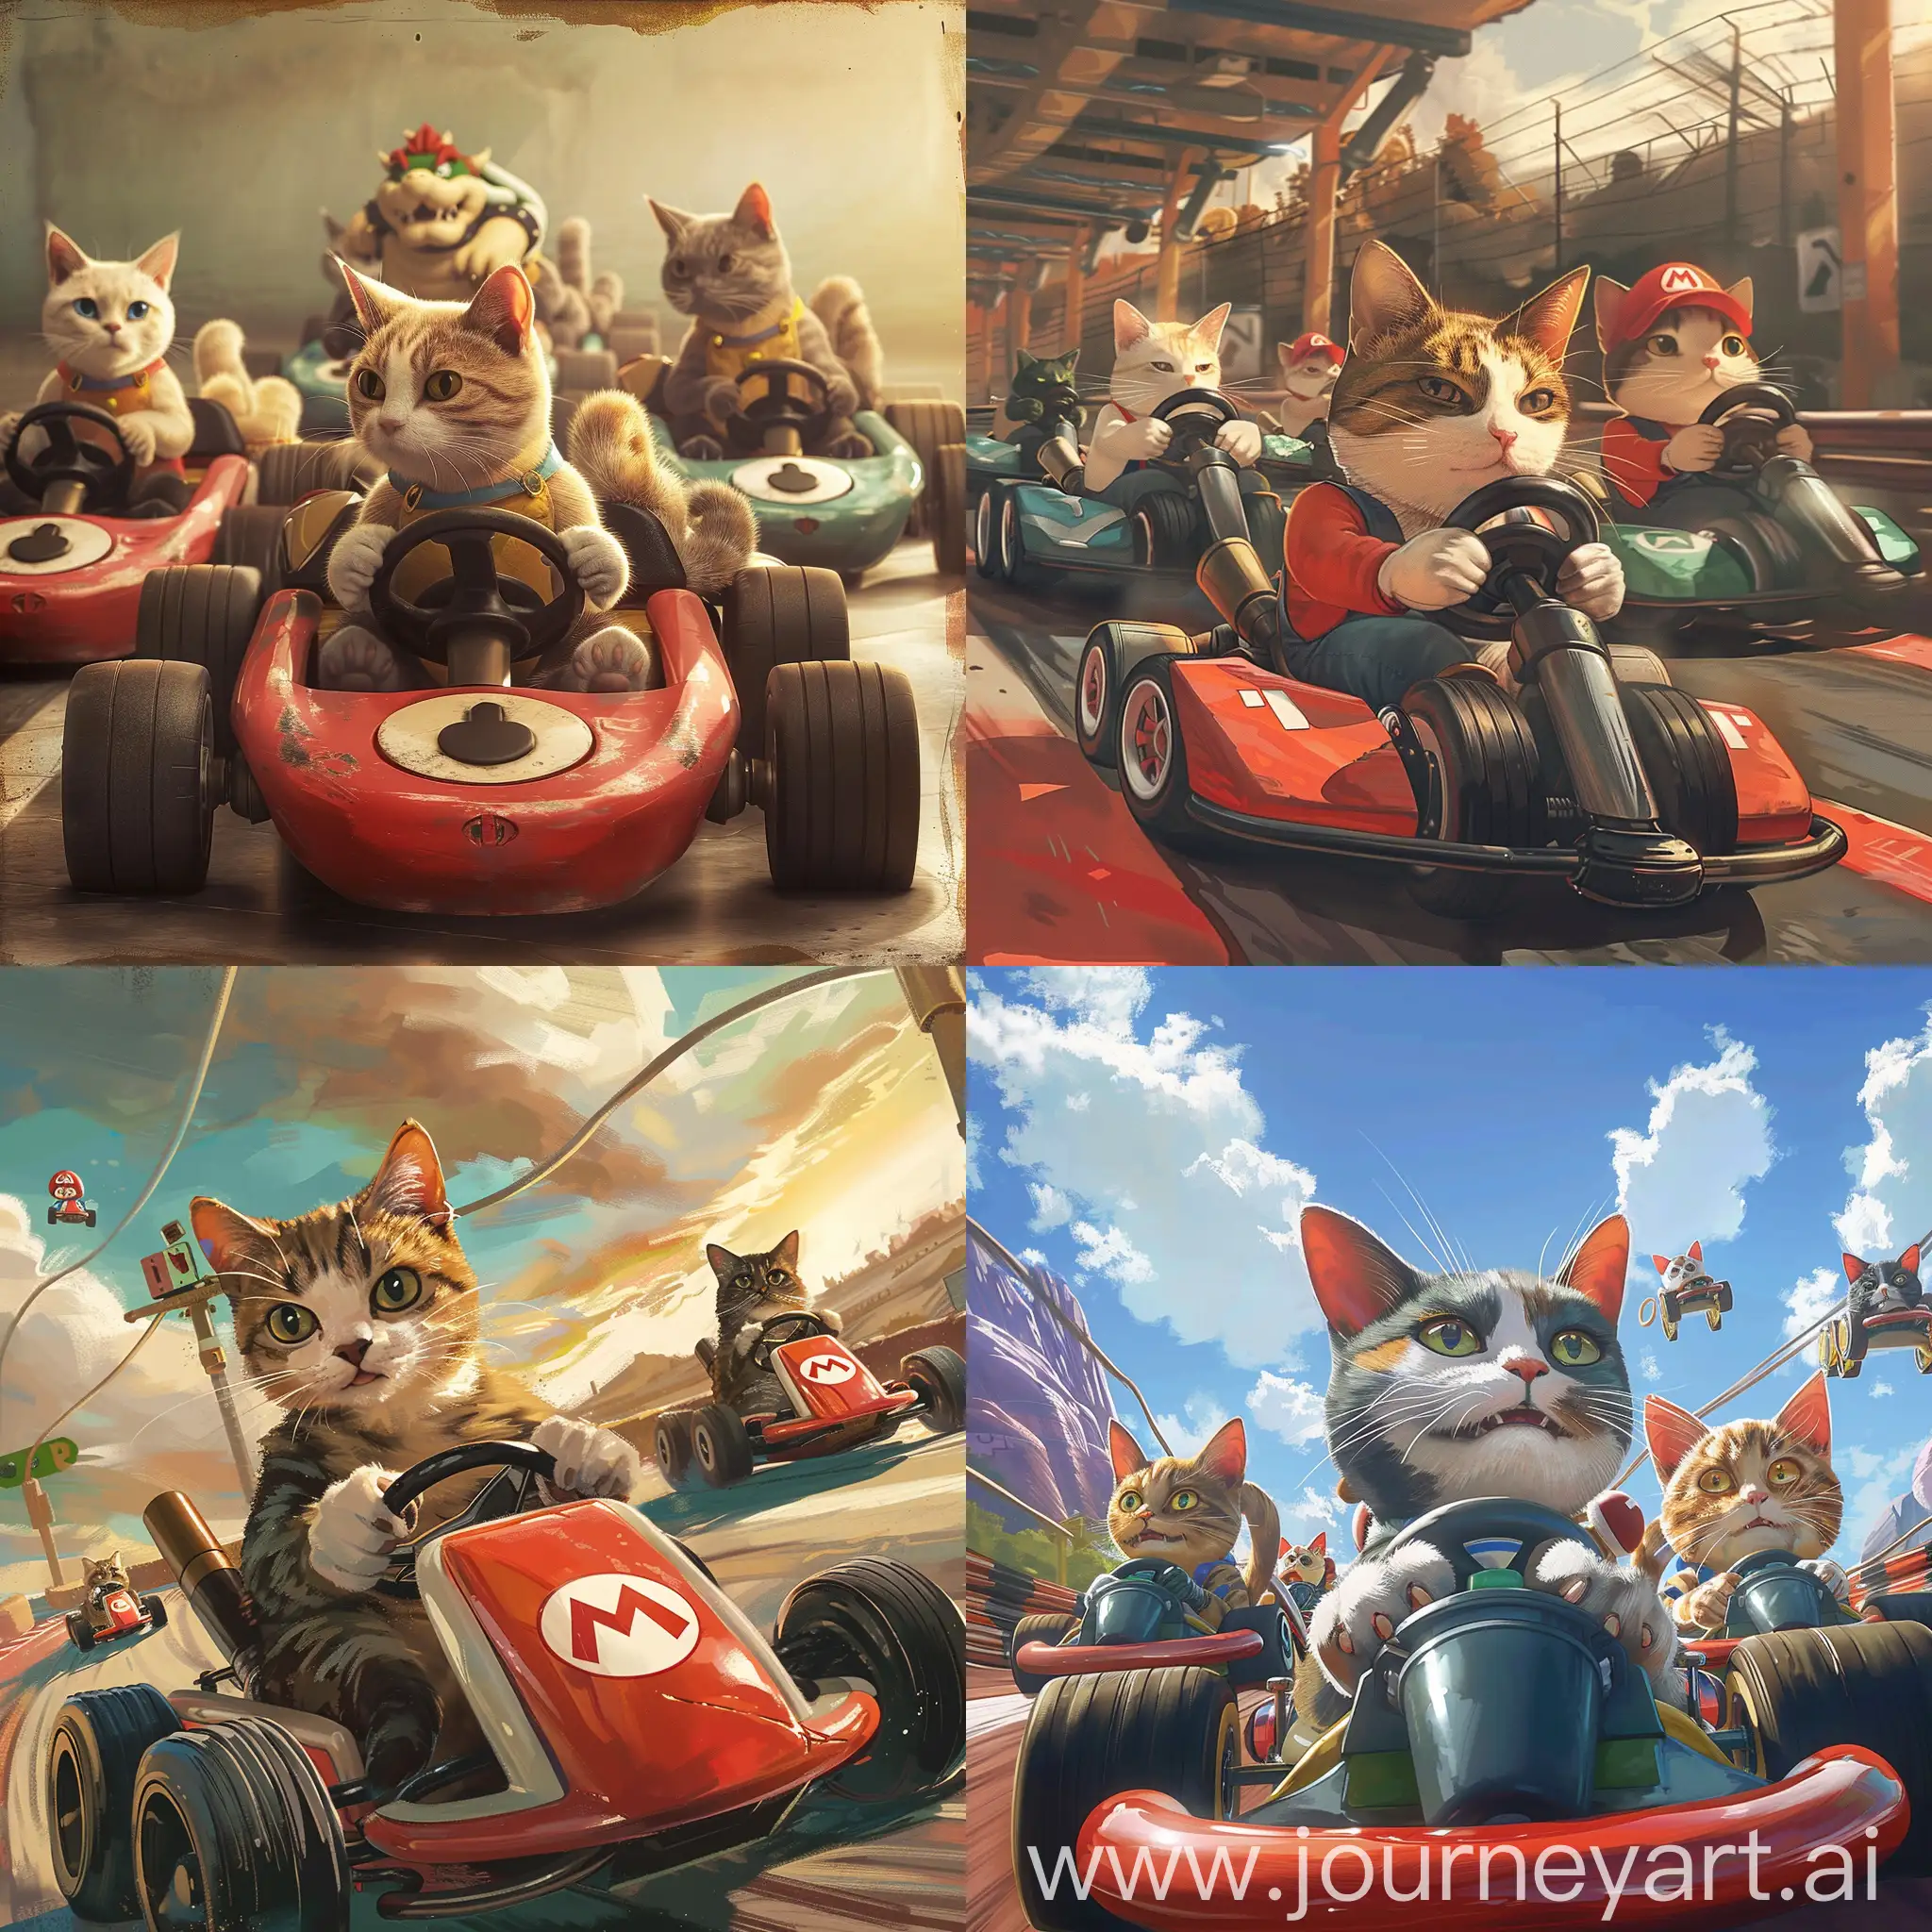 Create poster art for Mario Kart, but cat themed with cats on karts